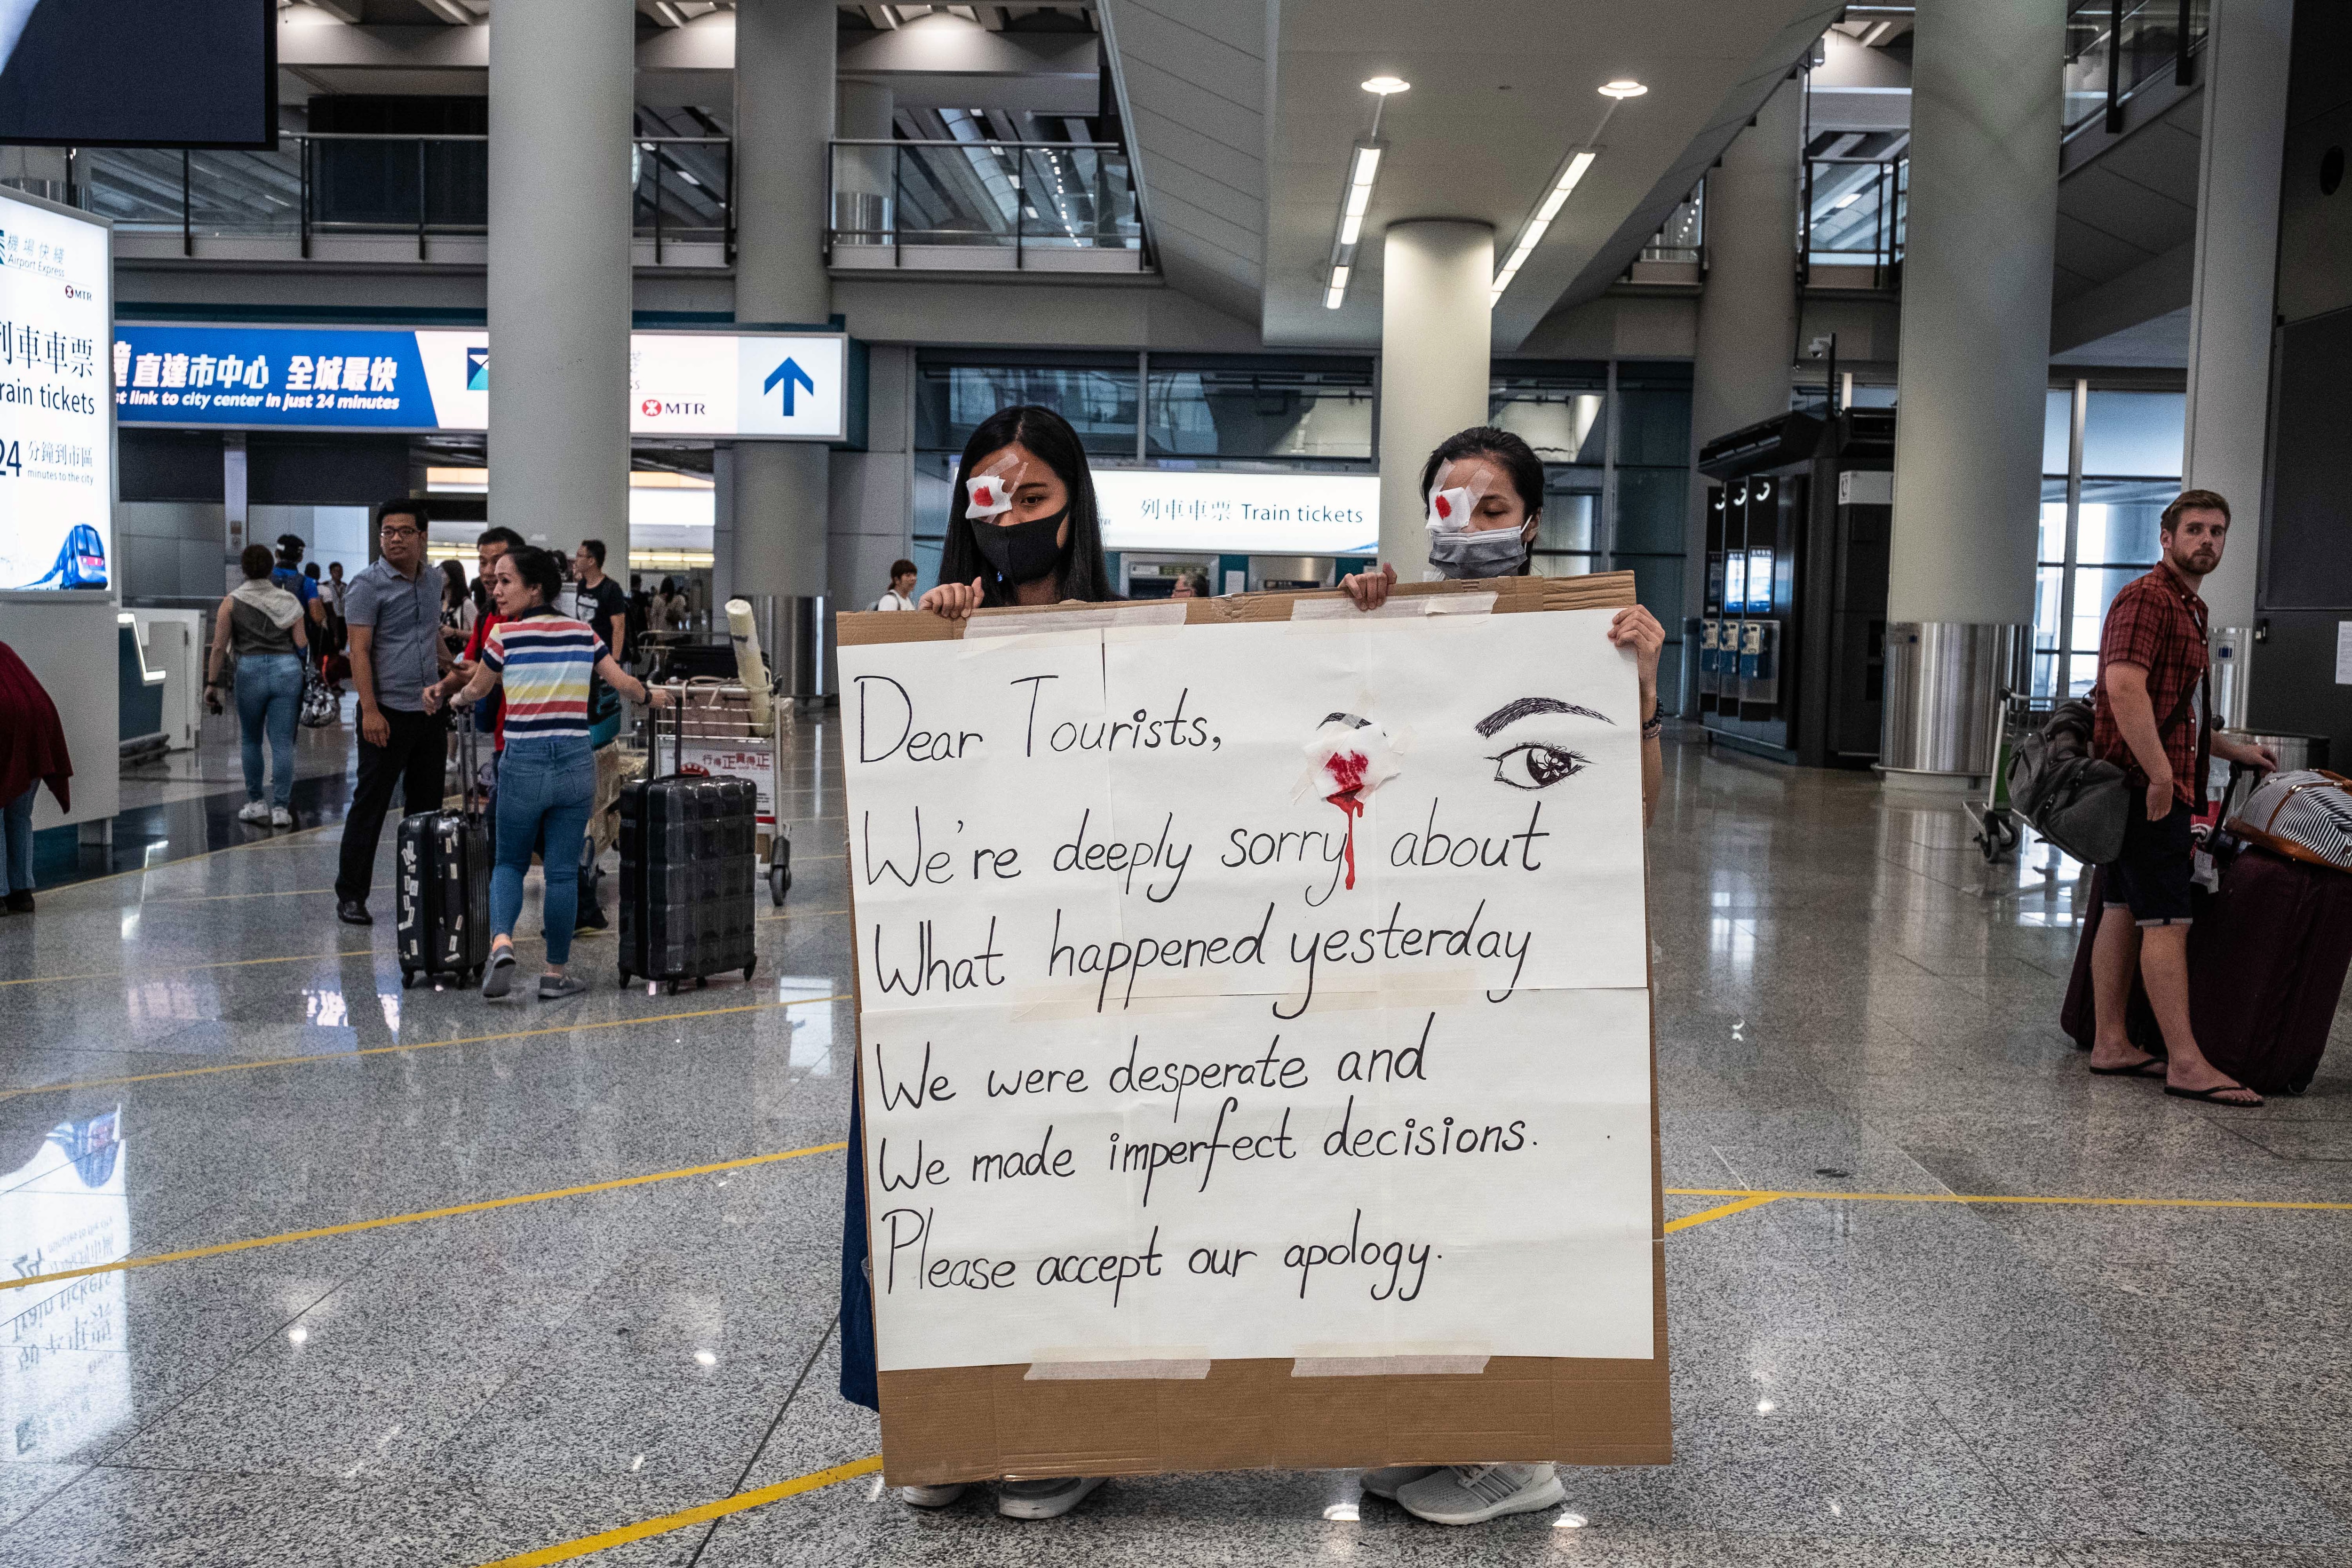 At the Hong Kong International Airport on Wednesday, Aug. 14, 2019, protesters offer travelers apologies, aware of the negative image they had presented in scuffles the day before.  (Lam Yik Fei/The New York Times)